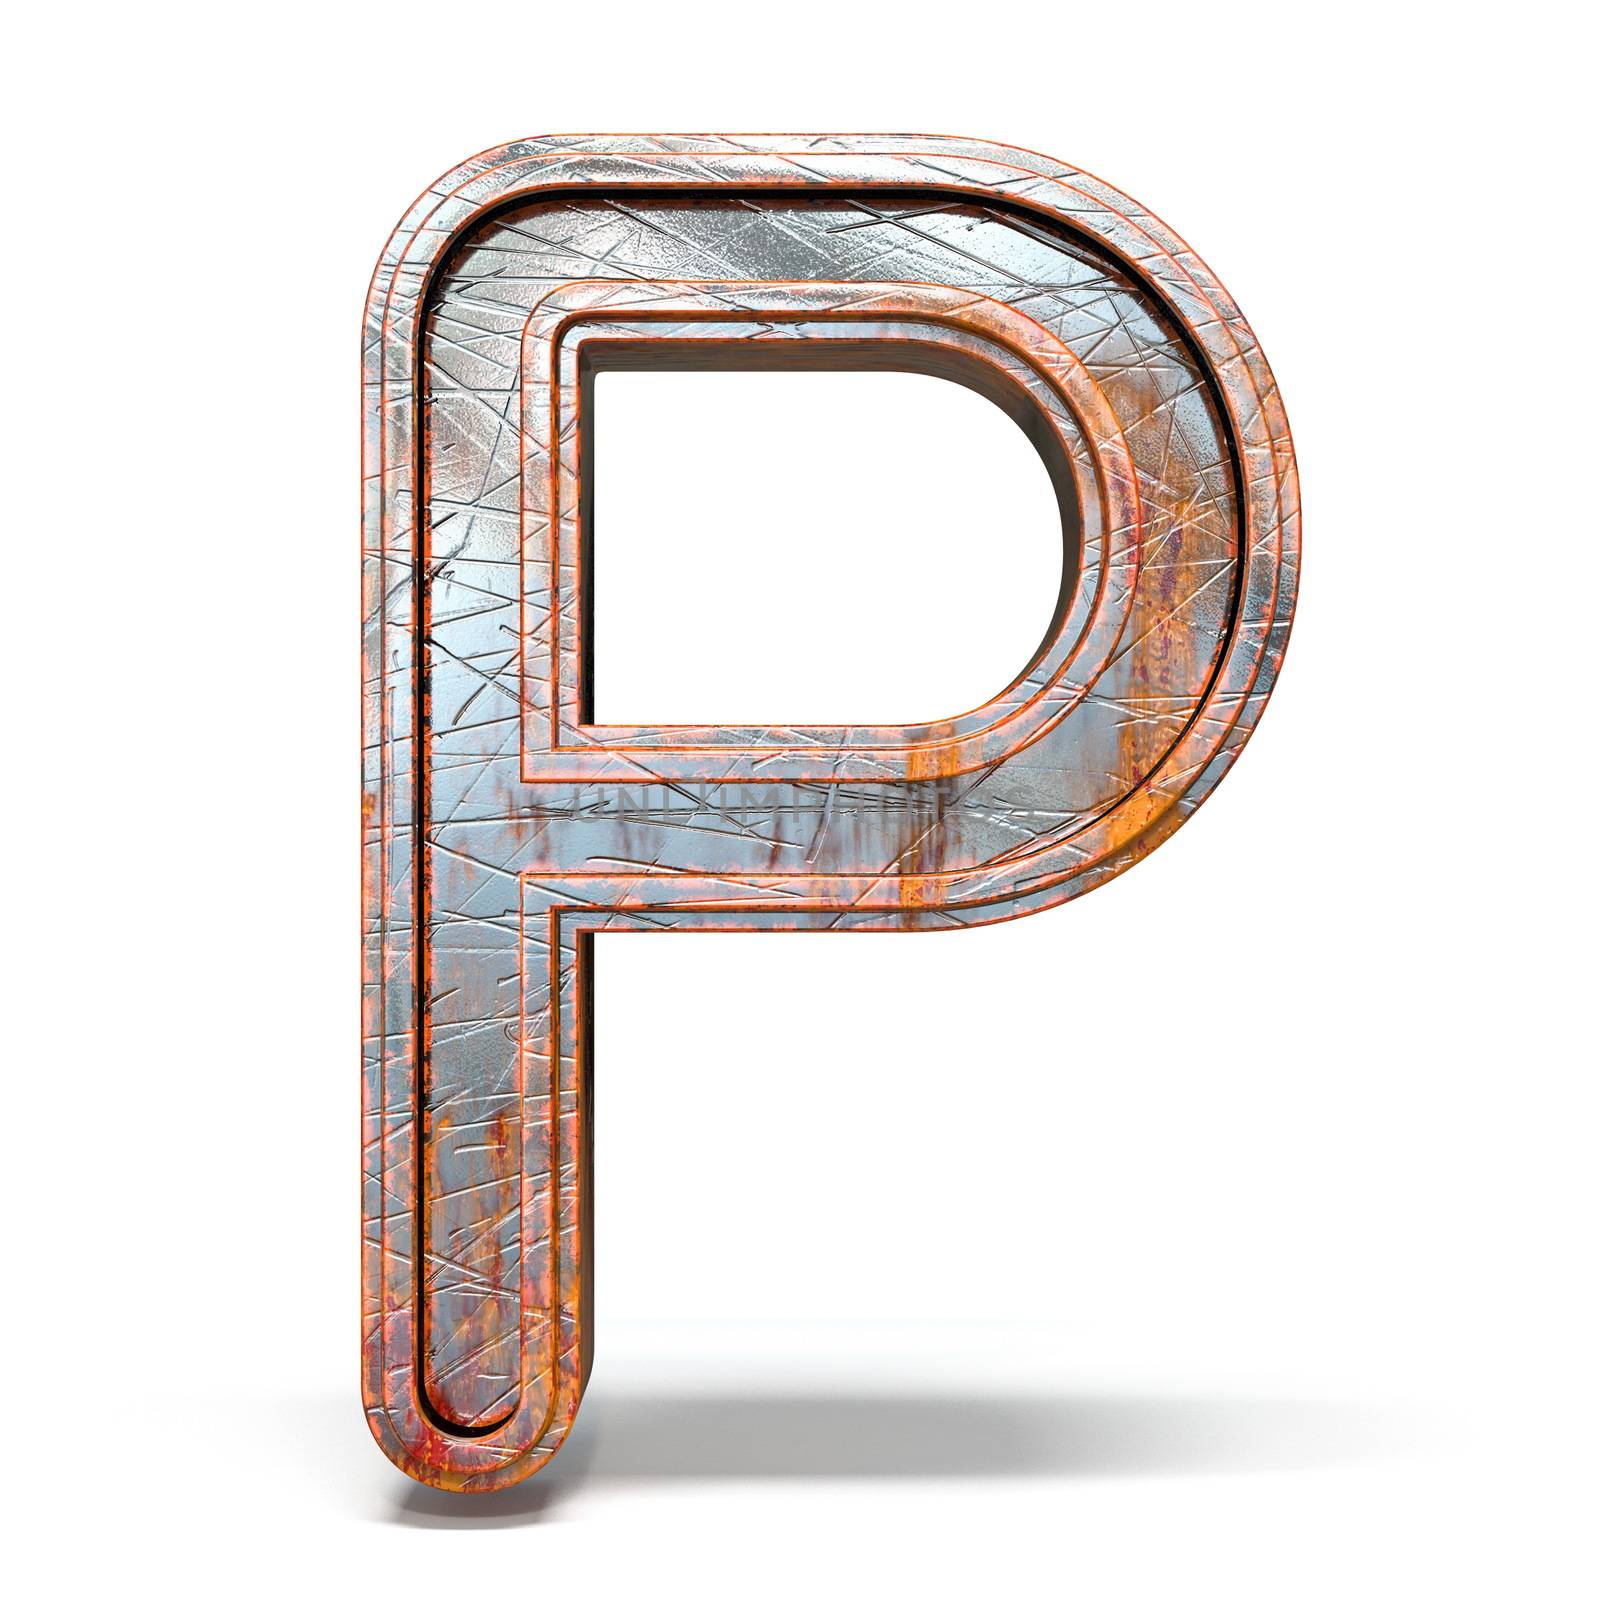 Rusty metal font Letter P 3D render illustration isolated on white background